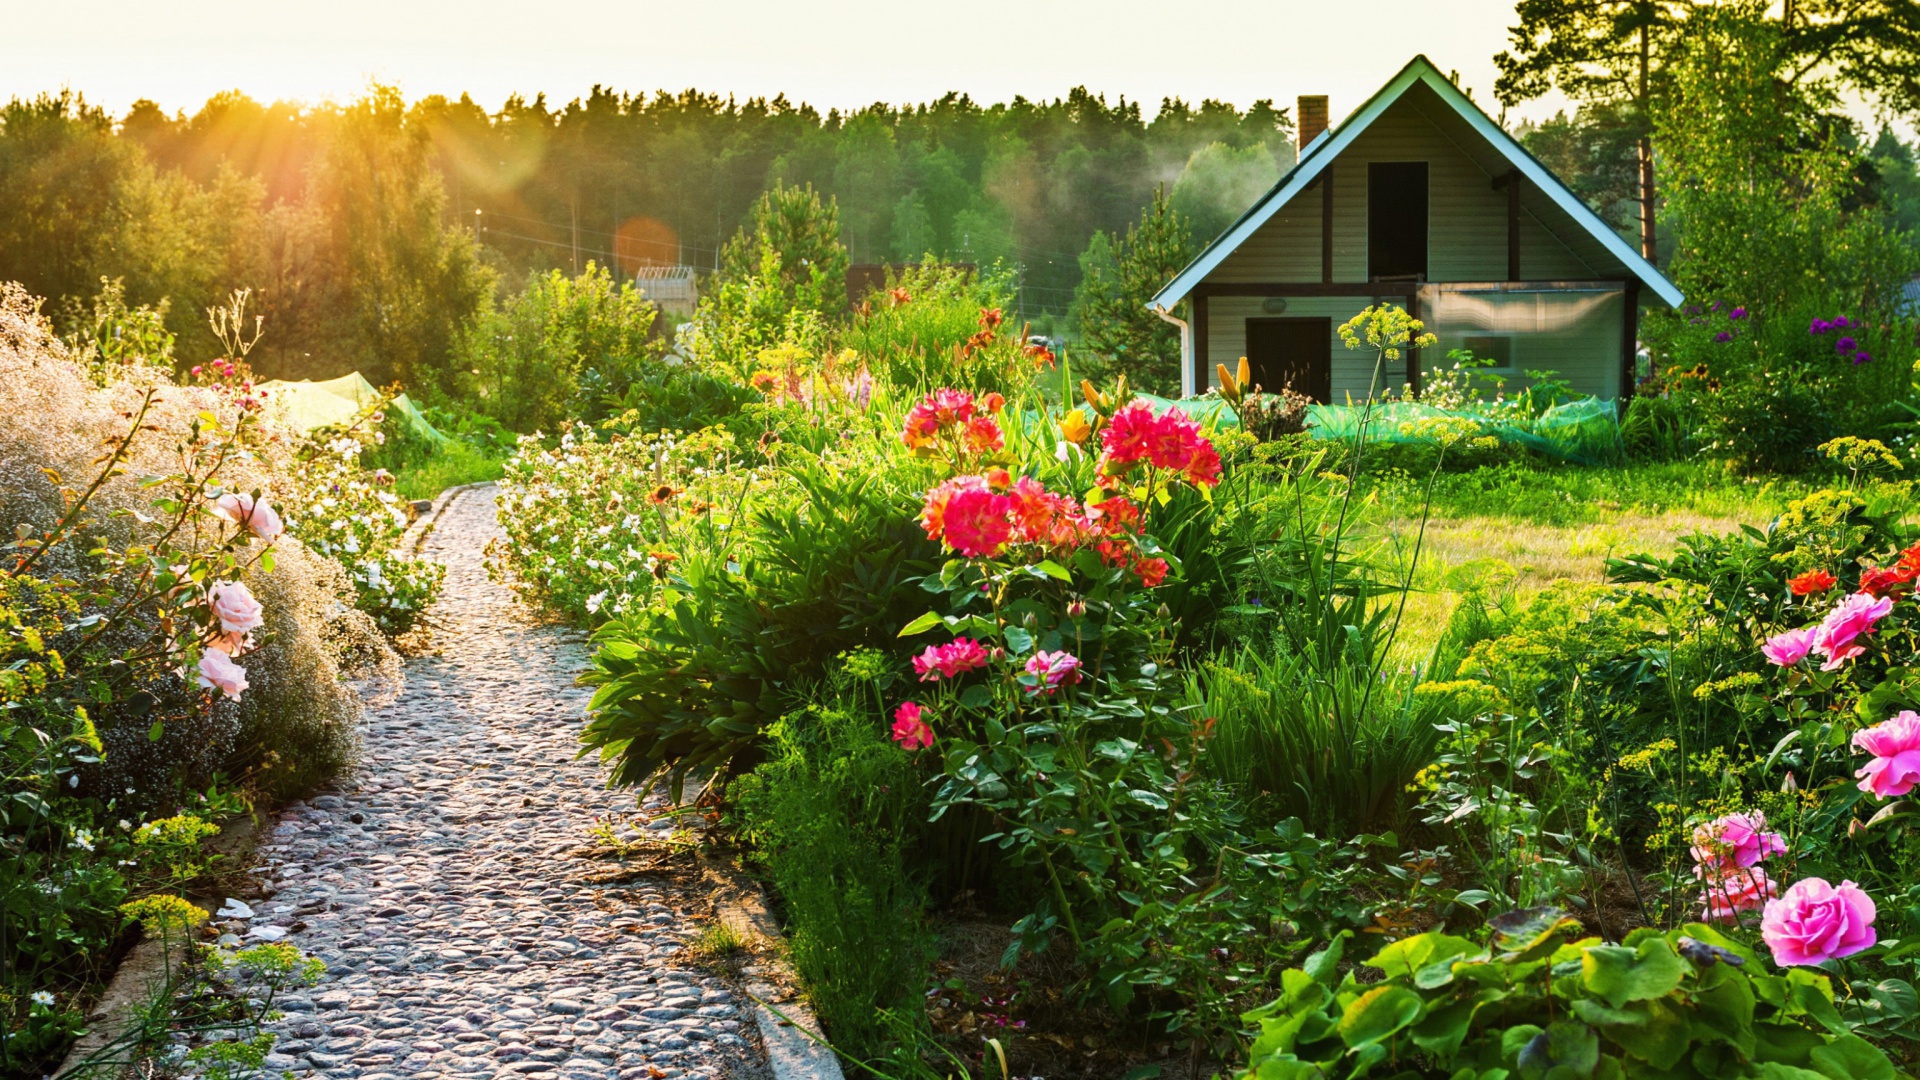 Country house with flowers wallpaper 1920x1080